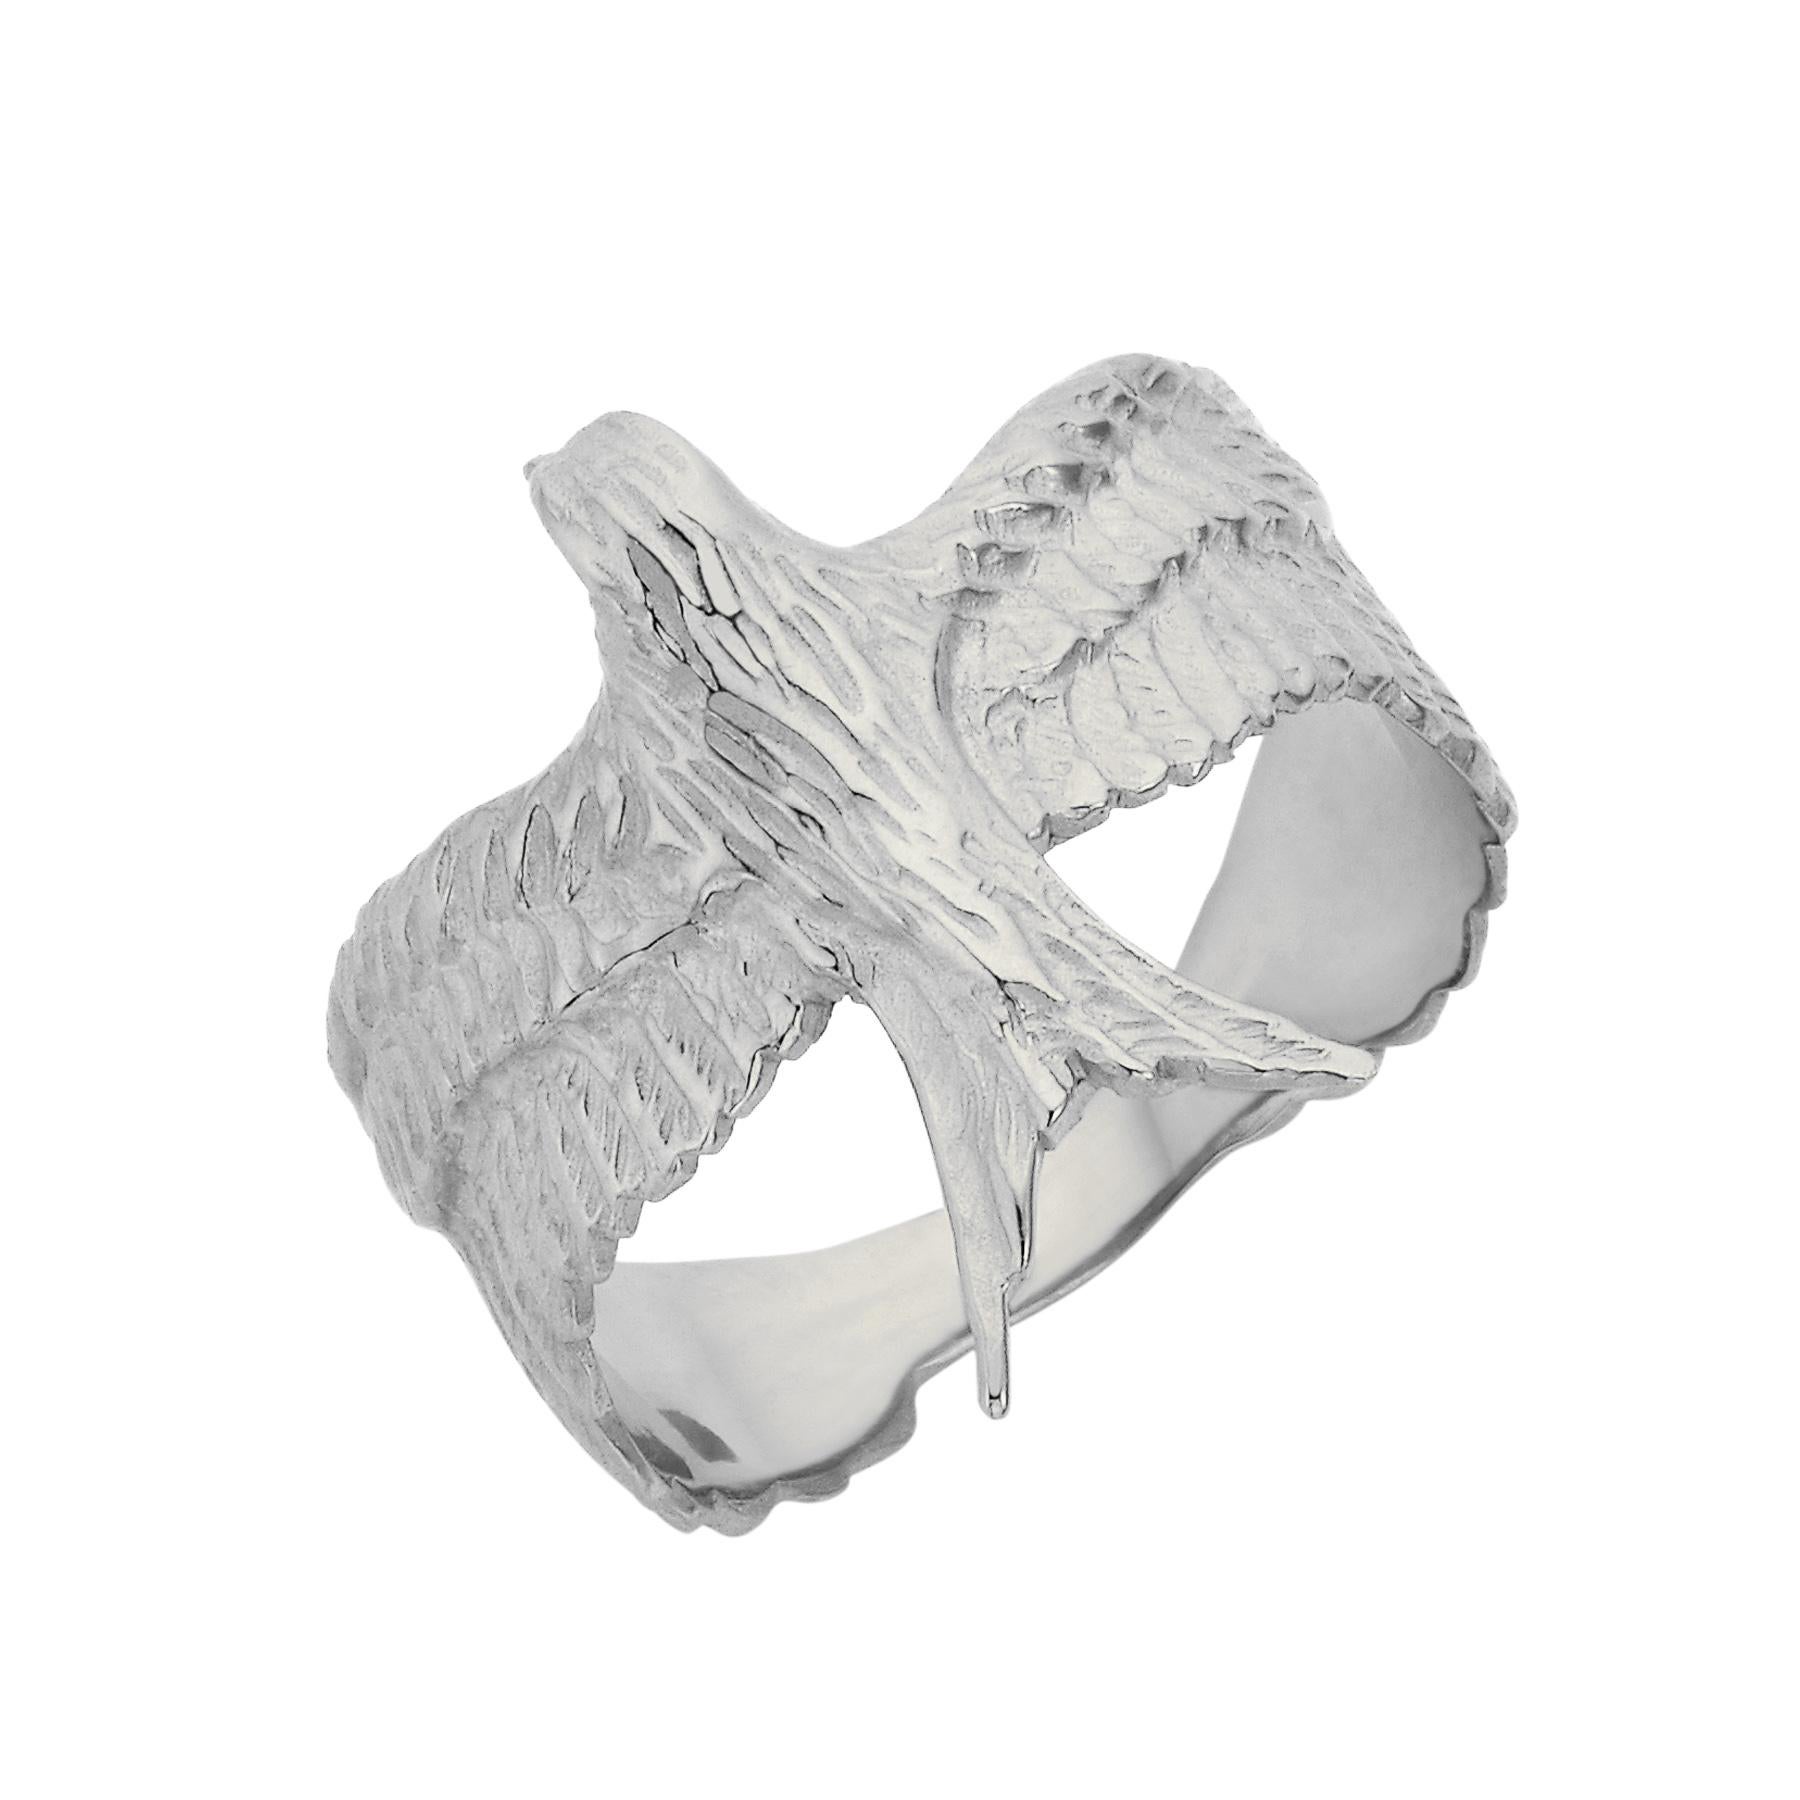 The swallow birds, once paired, remain together for life. They are a symbol of both freedom and loyalty. Even after distant travels, they reunite and stay close to one another. Our Lover ring is lovingly hand carved from a wax model, which creates